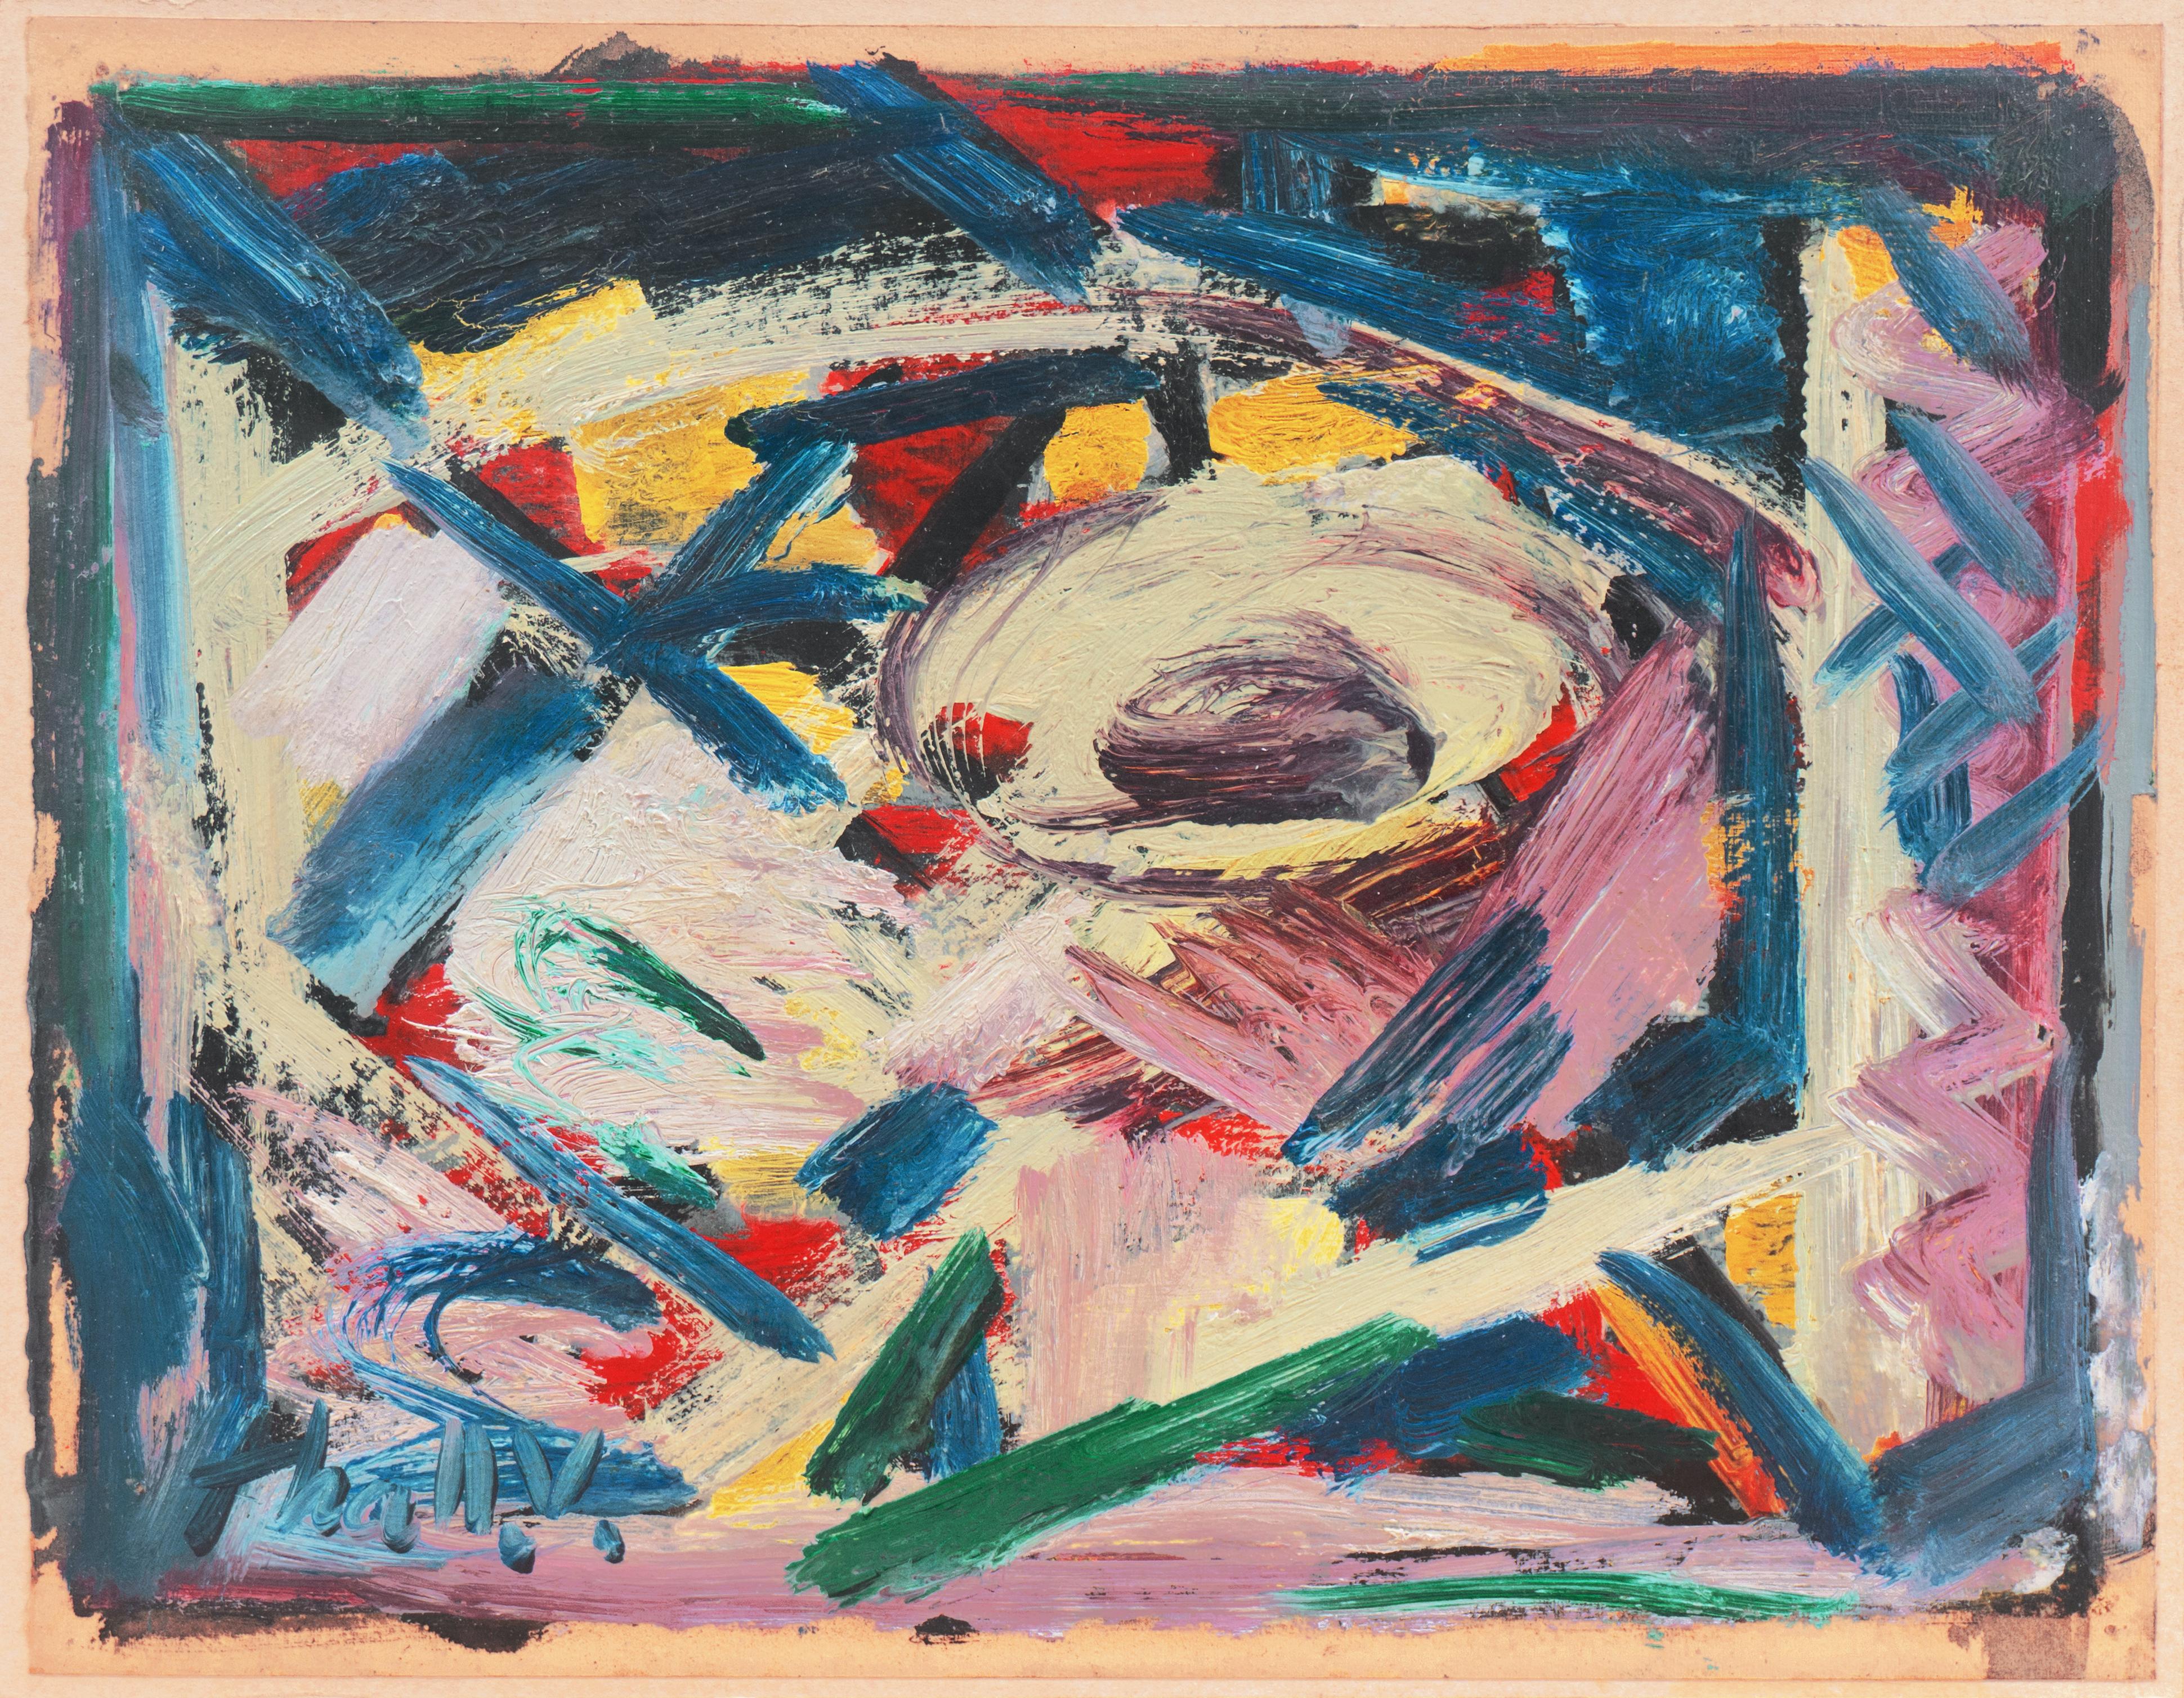 Signed lower left, 'Thall V' for Victor Thall (American, 1902-1983) and painted circa 1950.

A mid-century, American abstract oil comprising complex, contiguous and superimposed, linear and ovoid forms painted with an energetic and painterly brush